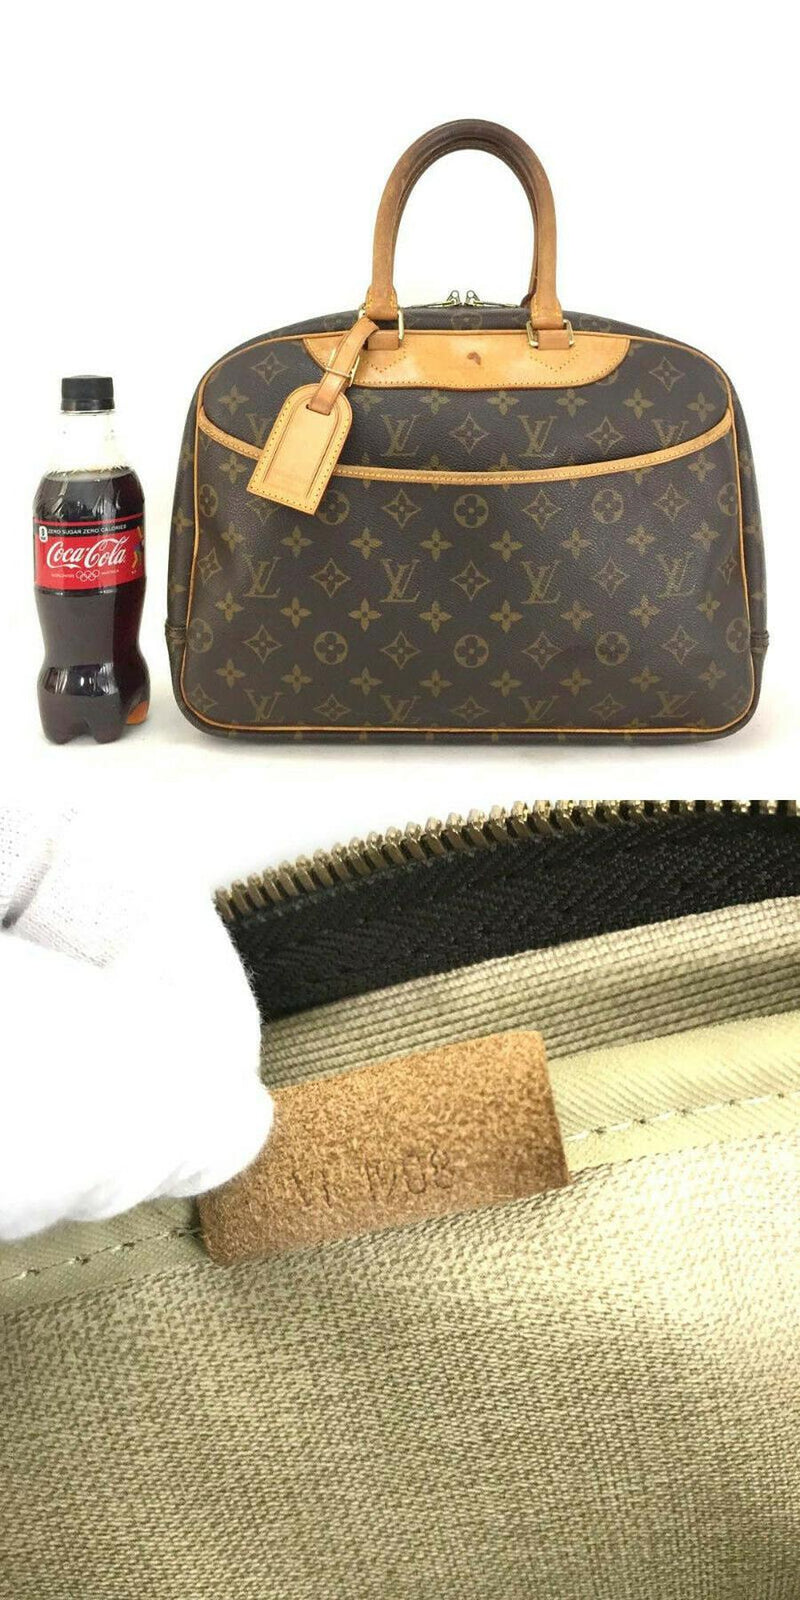 Pre-loved authentic Louis Vuitton Deauville Boston Bag sale at jebwa.